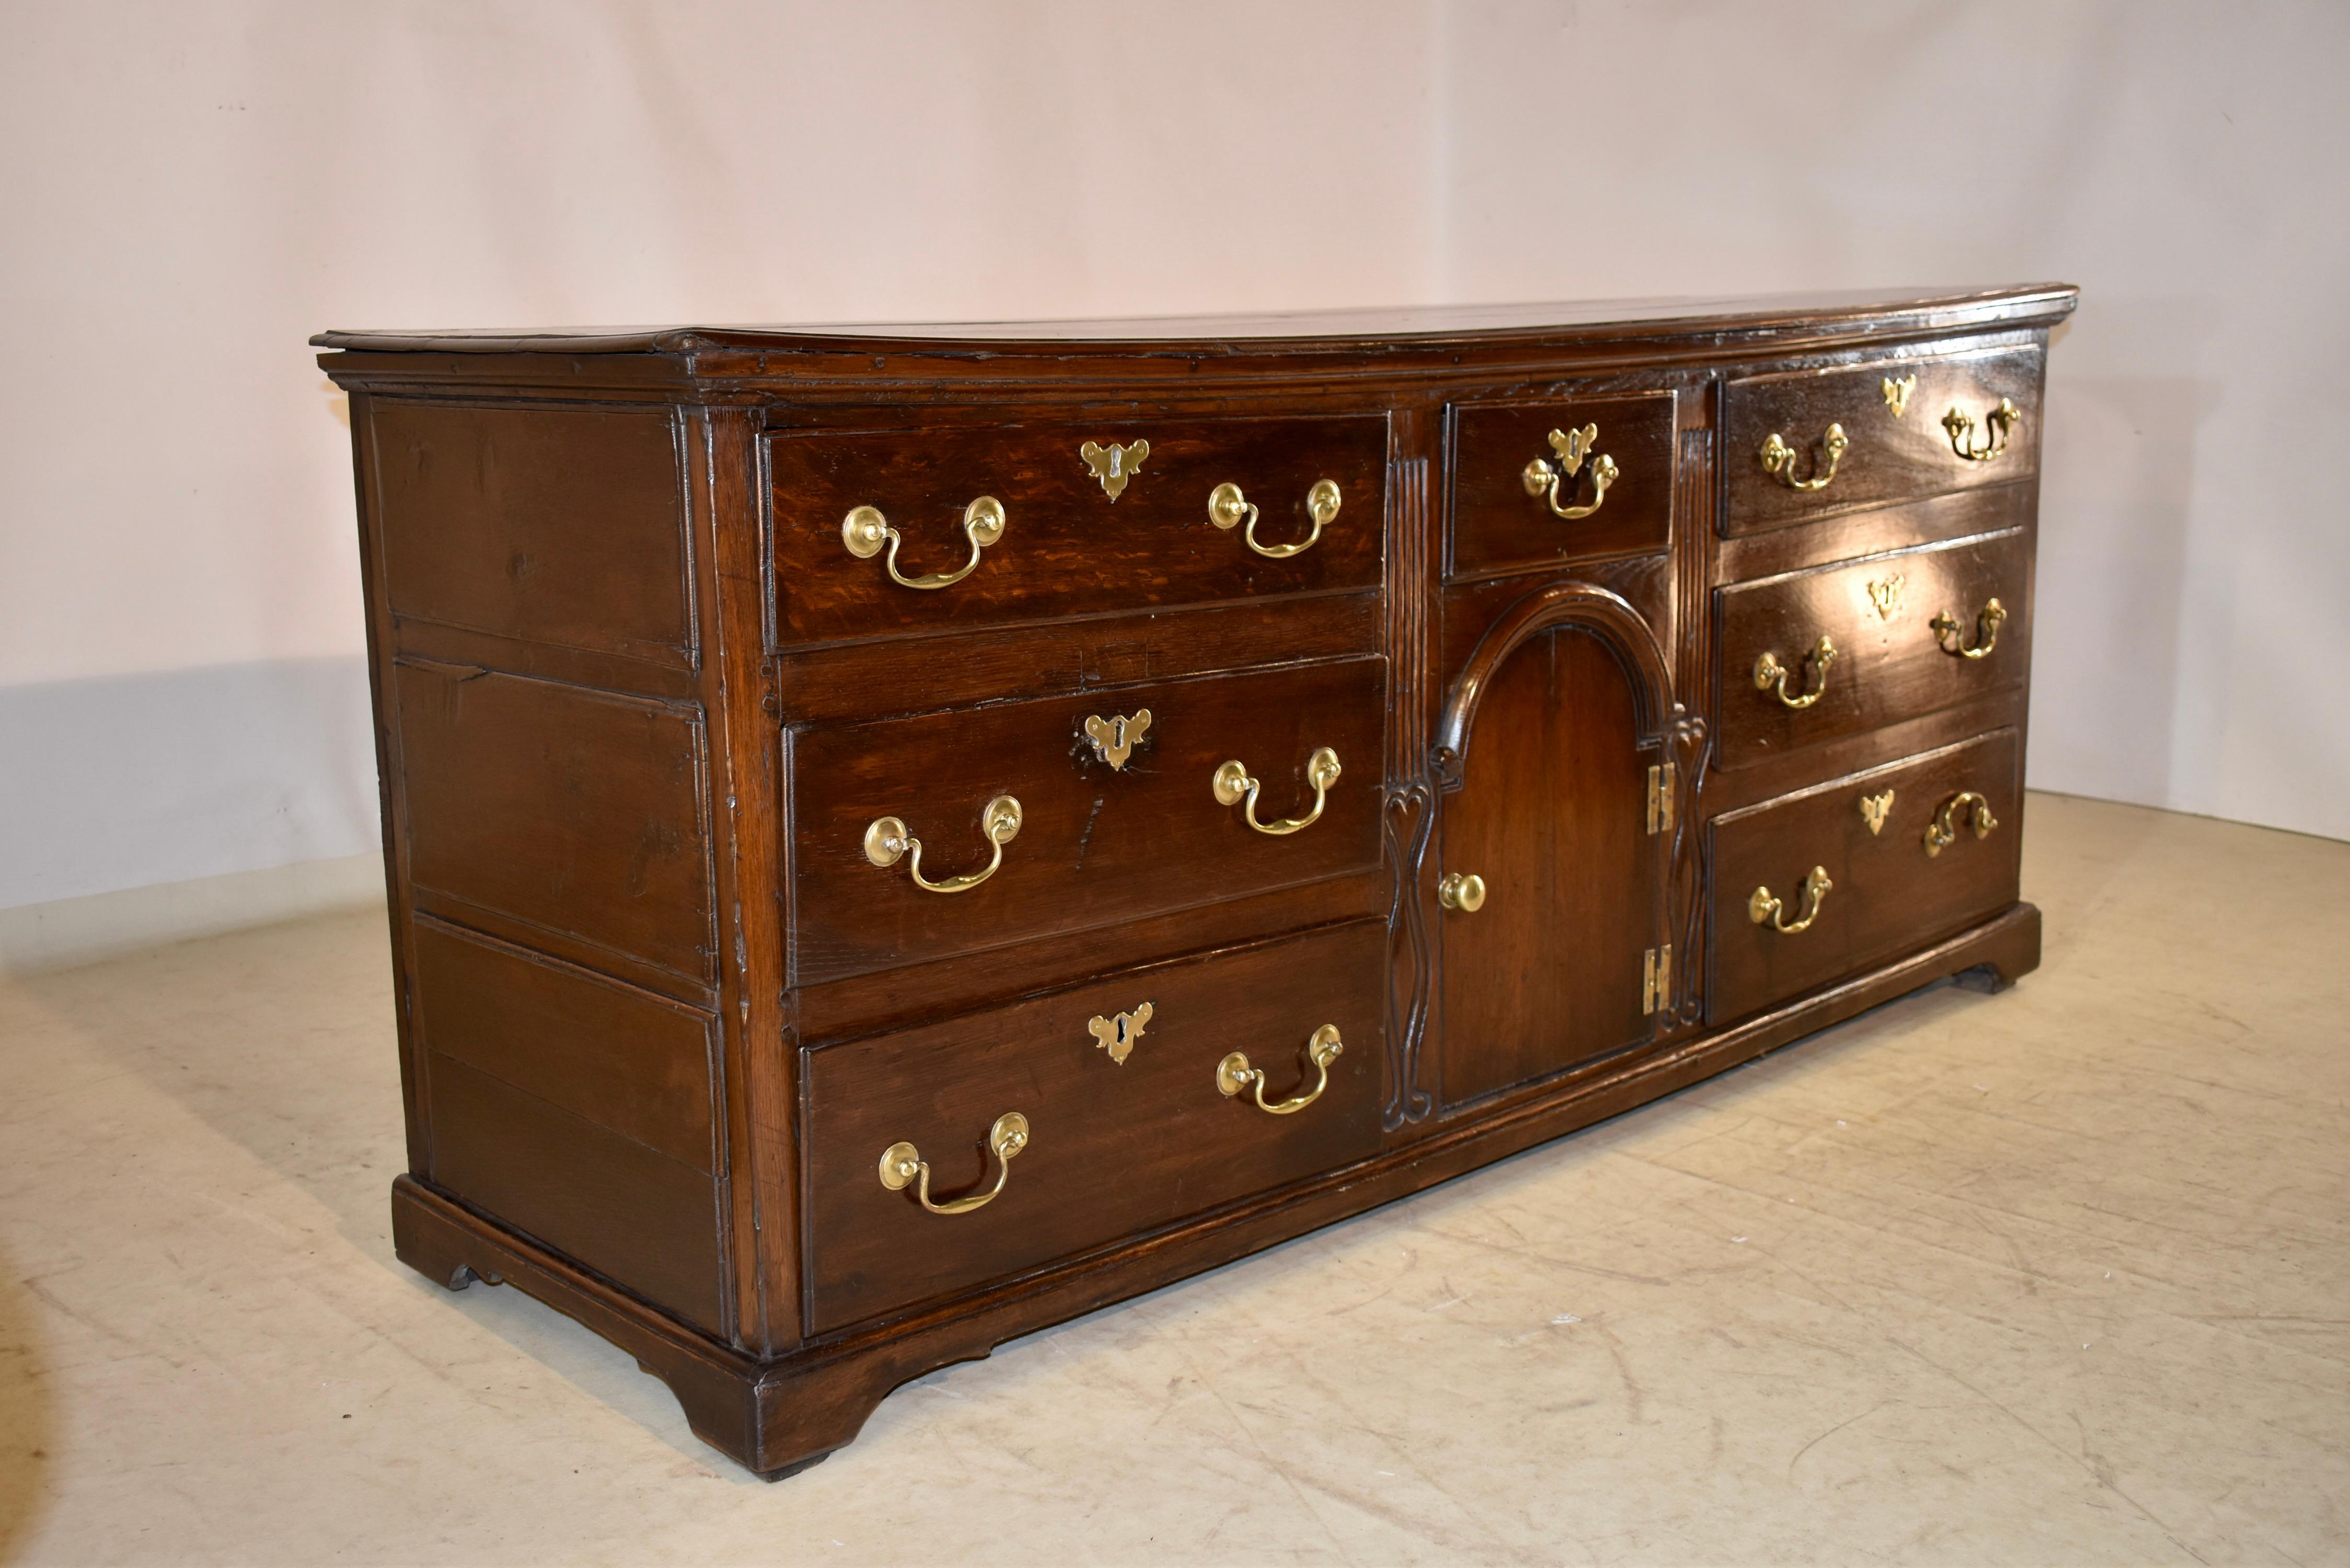 18th Century English Oak Dresser Base In Good Condition For Sale In High Point, NC